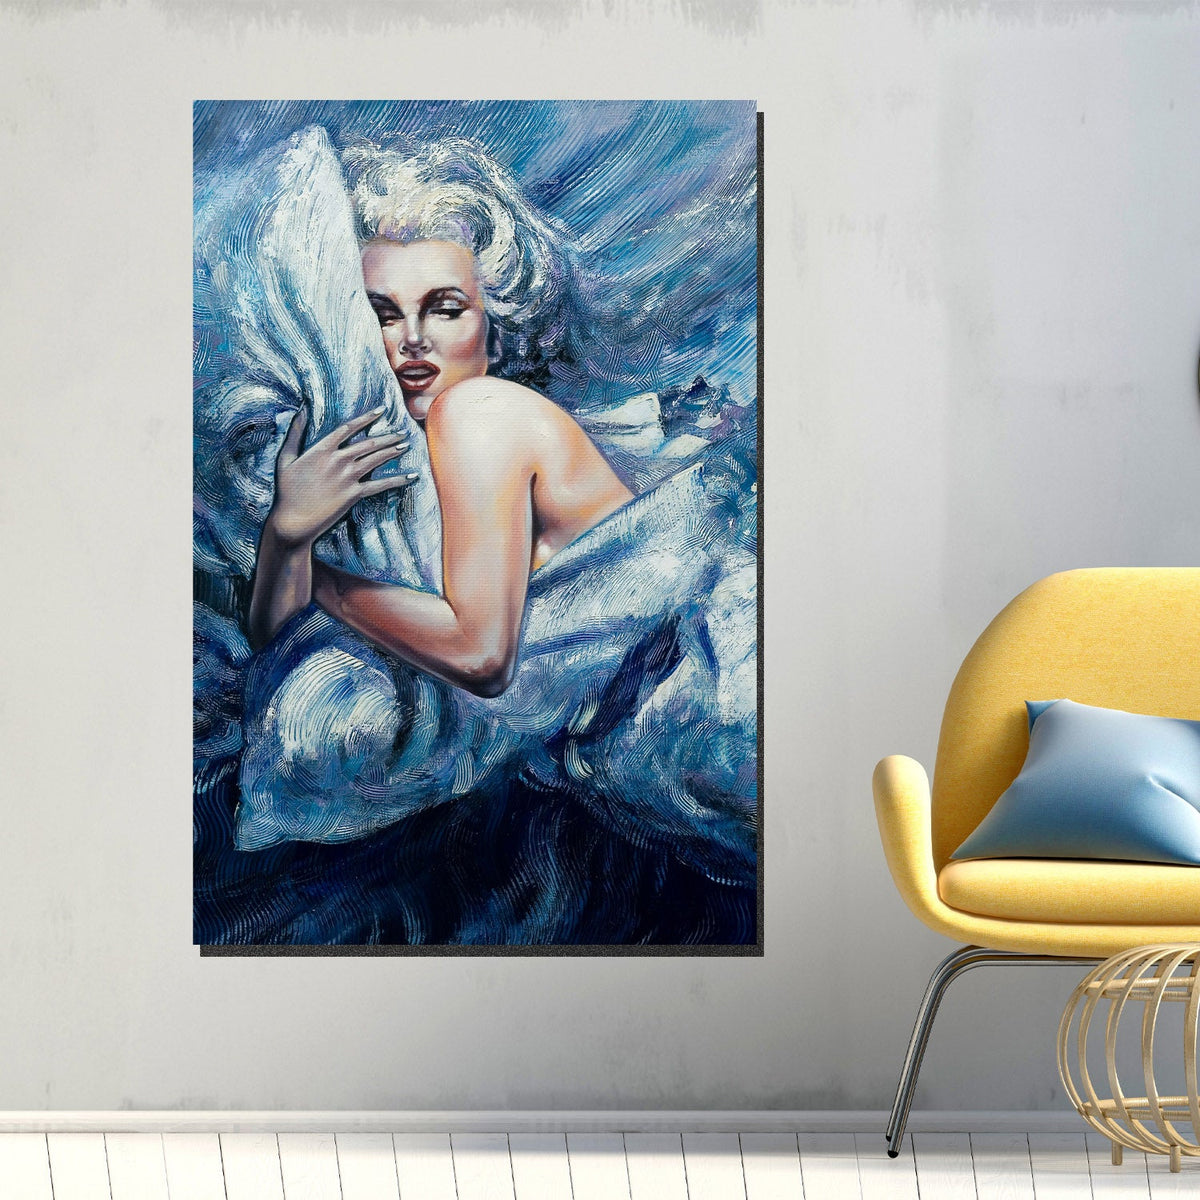 https://cdn.shopify.com/s/files/1/0387/9986/8044/products/WomaninBedCanvasArtPrintStretched-1.jpg